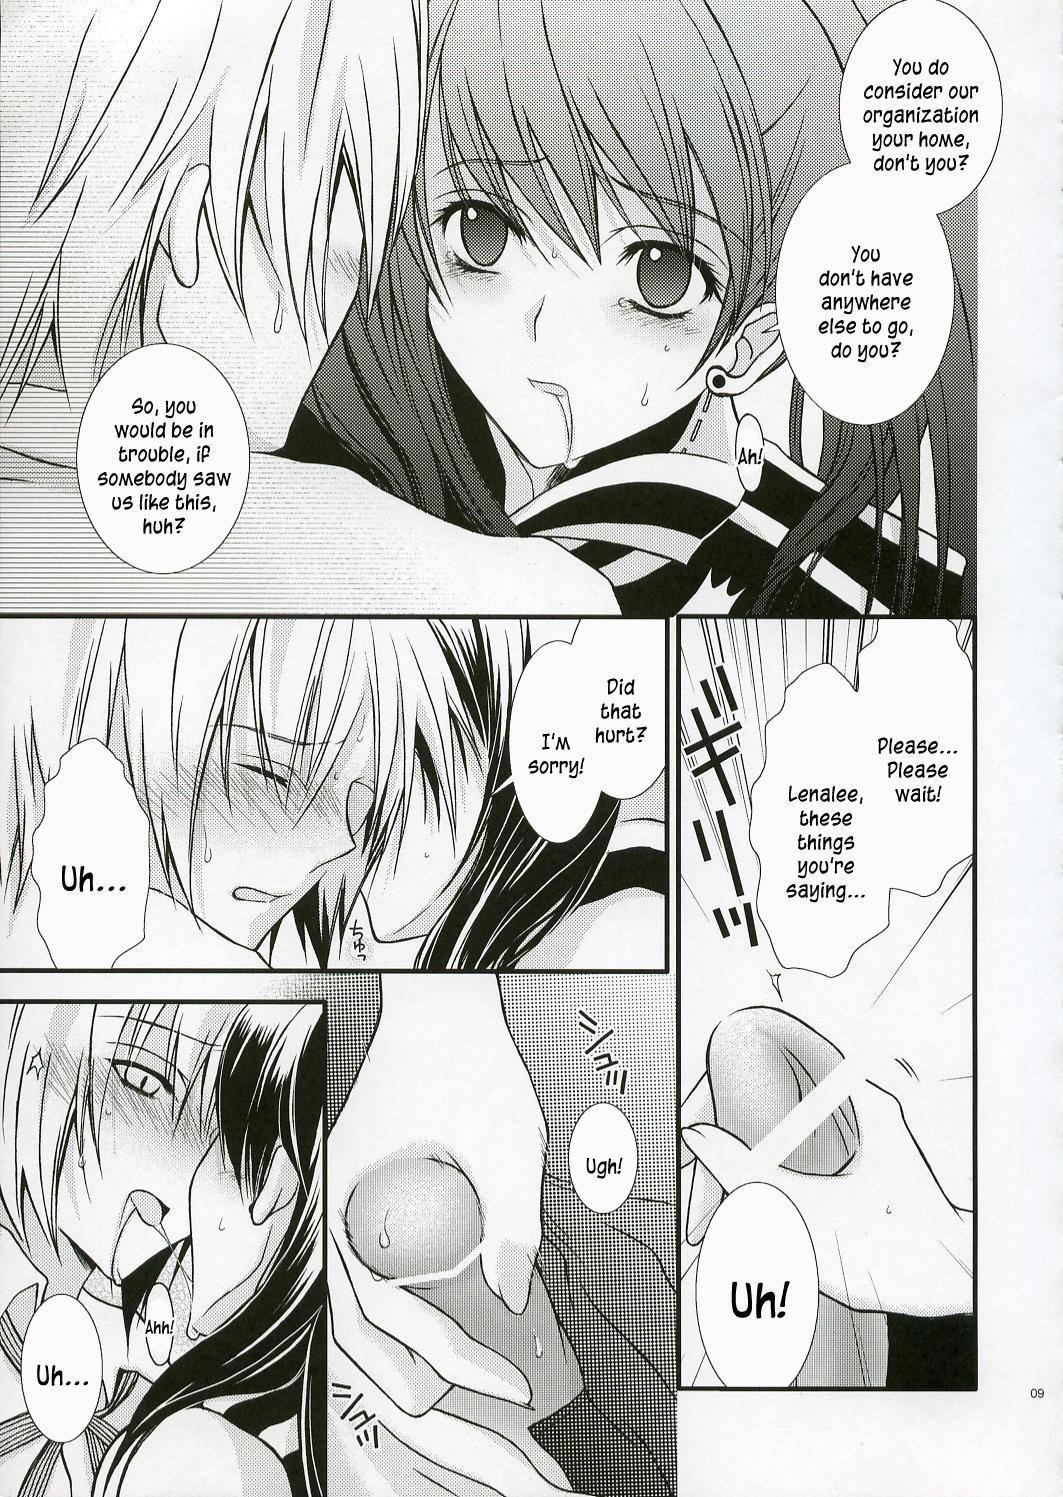 From PINK PRISONER - D.gray-man Boy Girl - Page 8